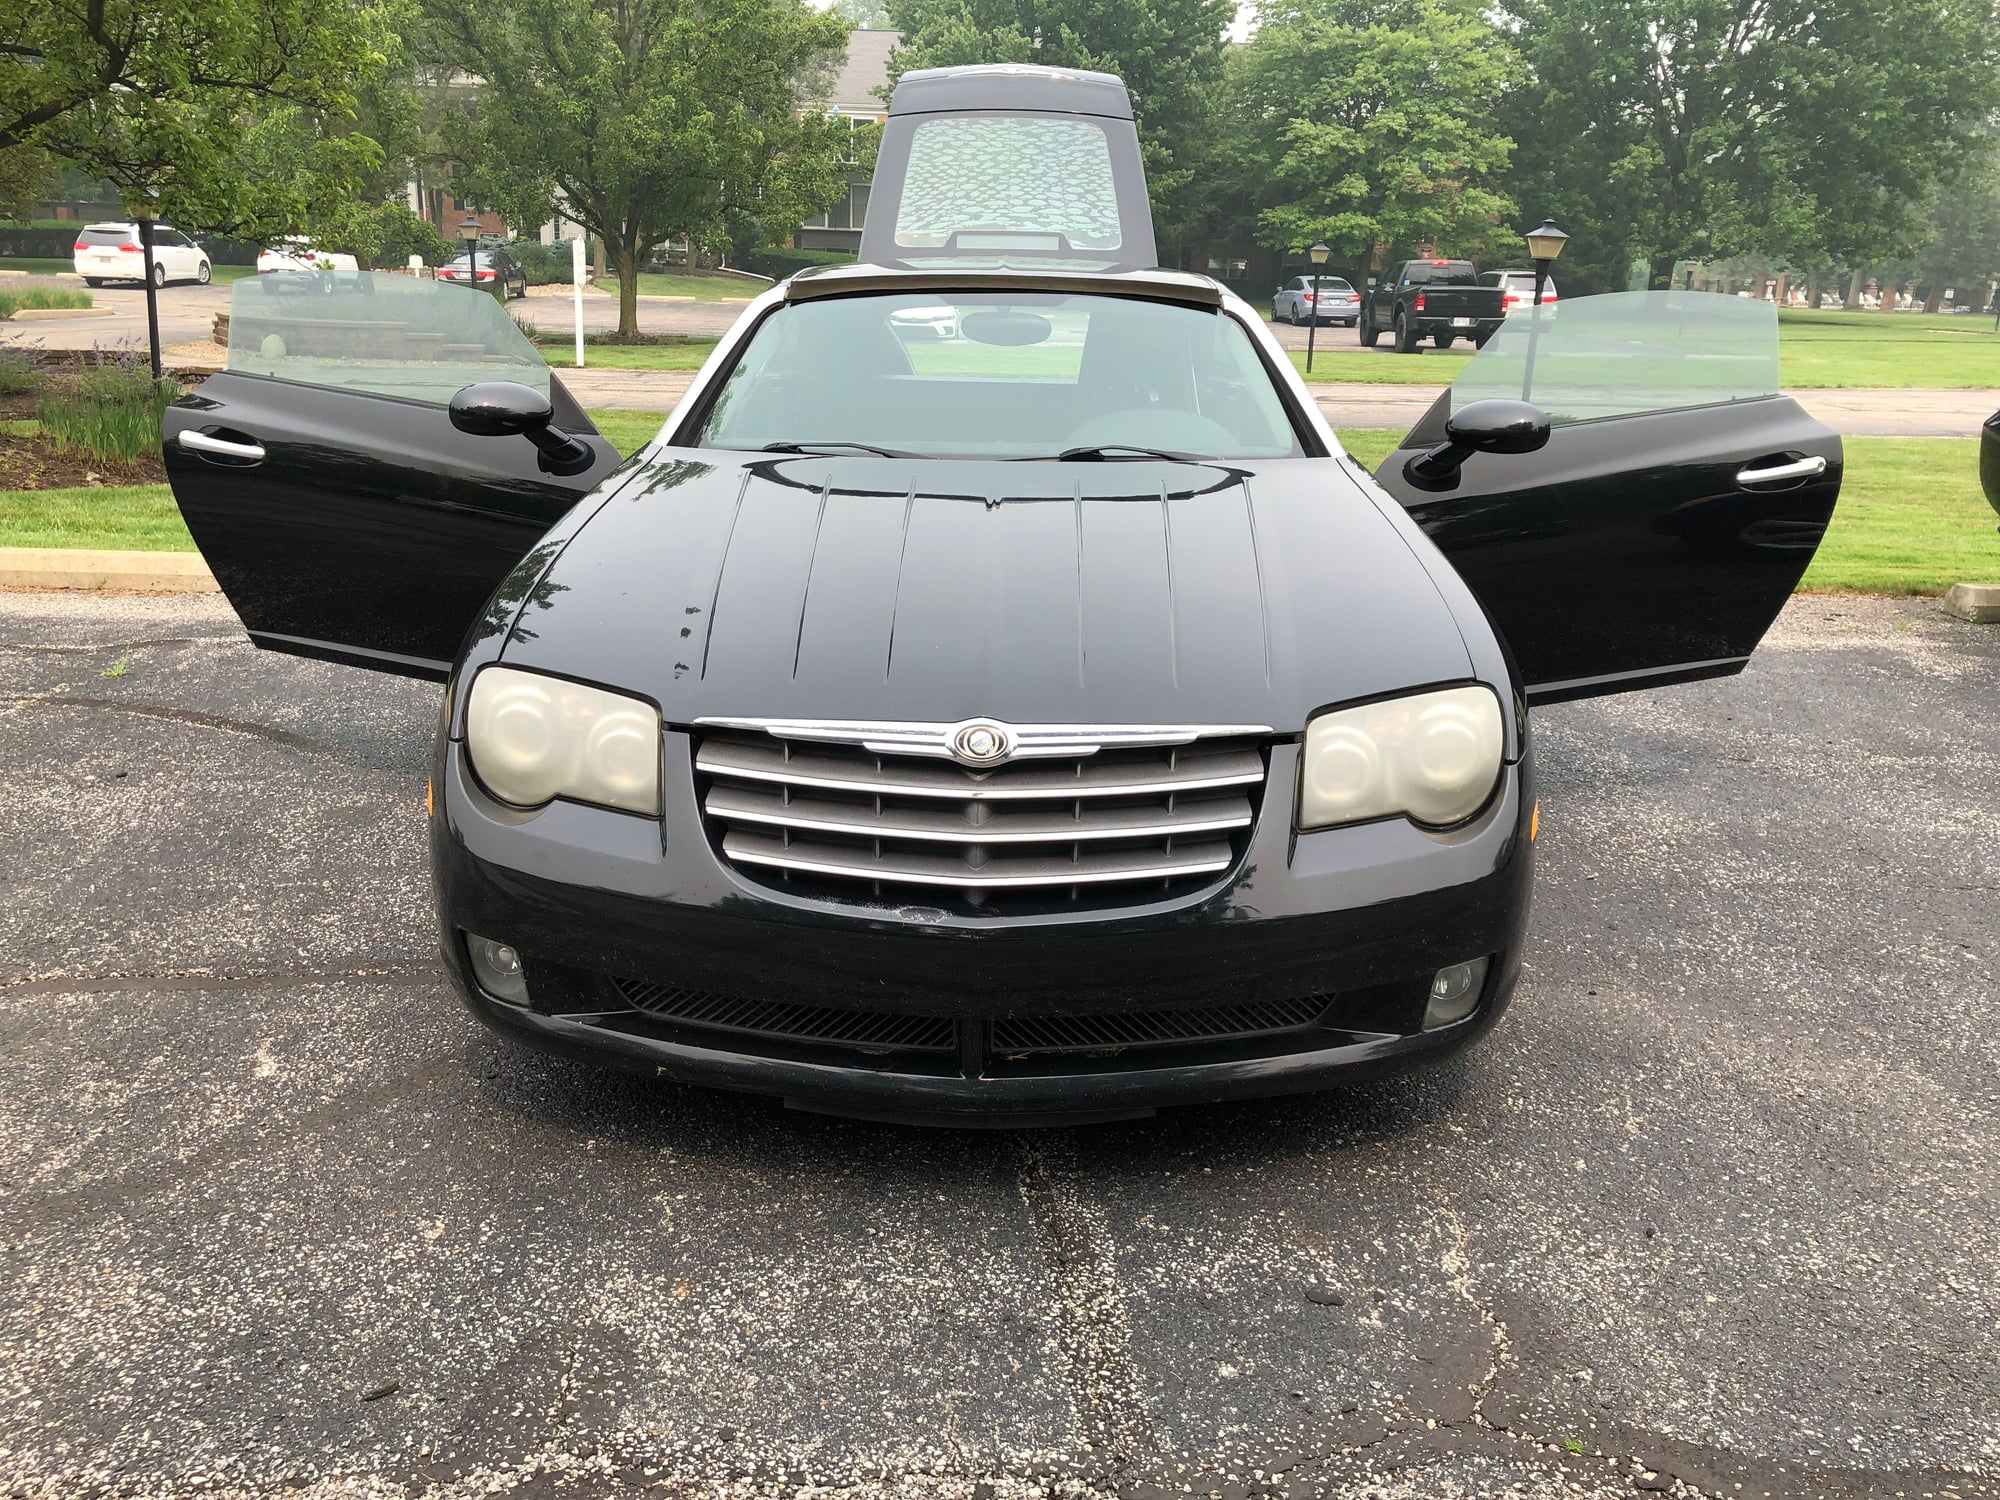 2004 Chrysler Crossfire - 2004 Chrysler Crossfire w/mods - Used - VIN 1can69l14x001438 - 123,000 Miles - 6 cyl - 2WD - Coupe - Black - Stow, OH 44224, United States